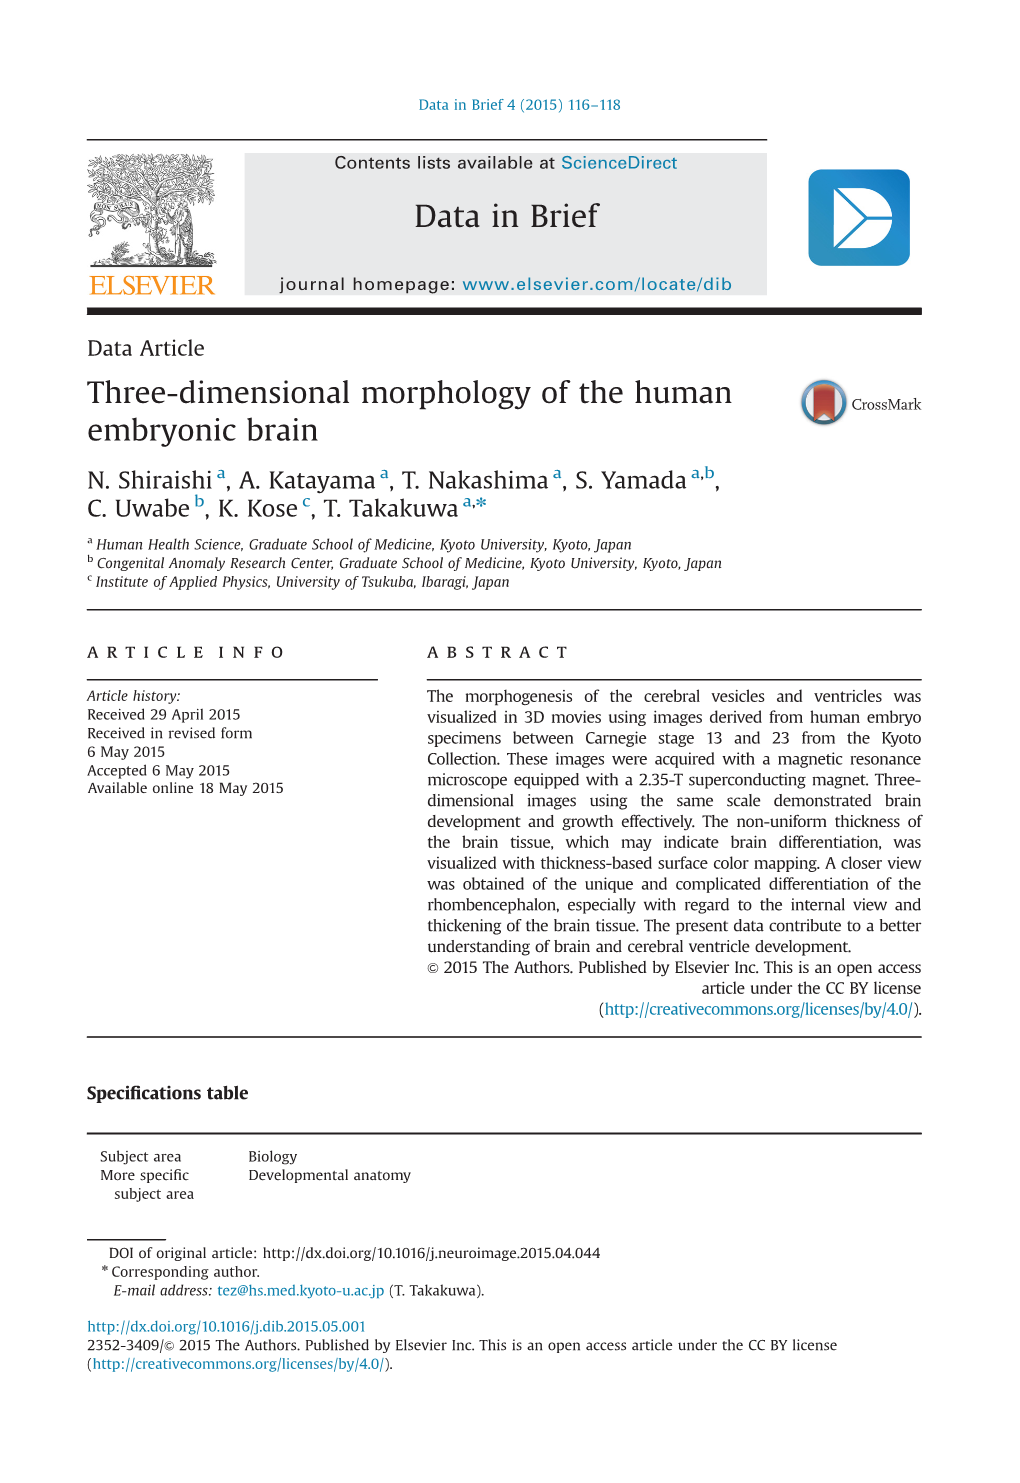 Three-Dimensional Morphology of the Human Embryonic Brain